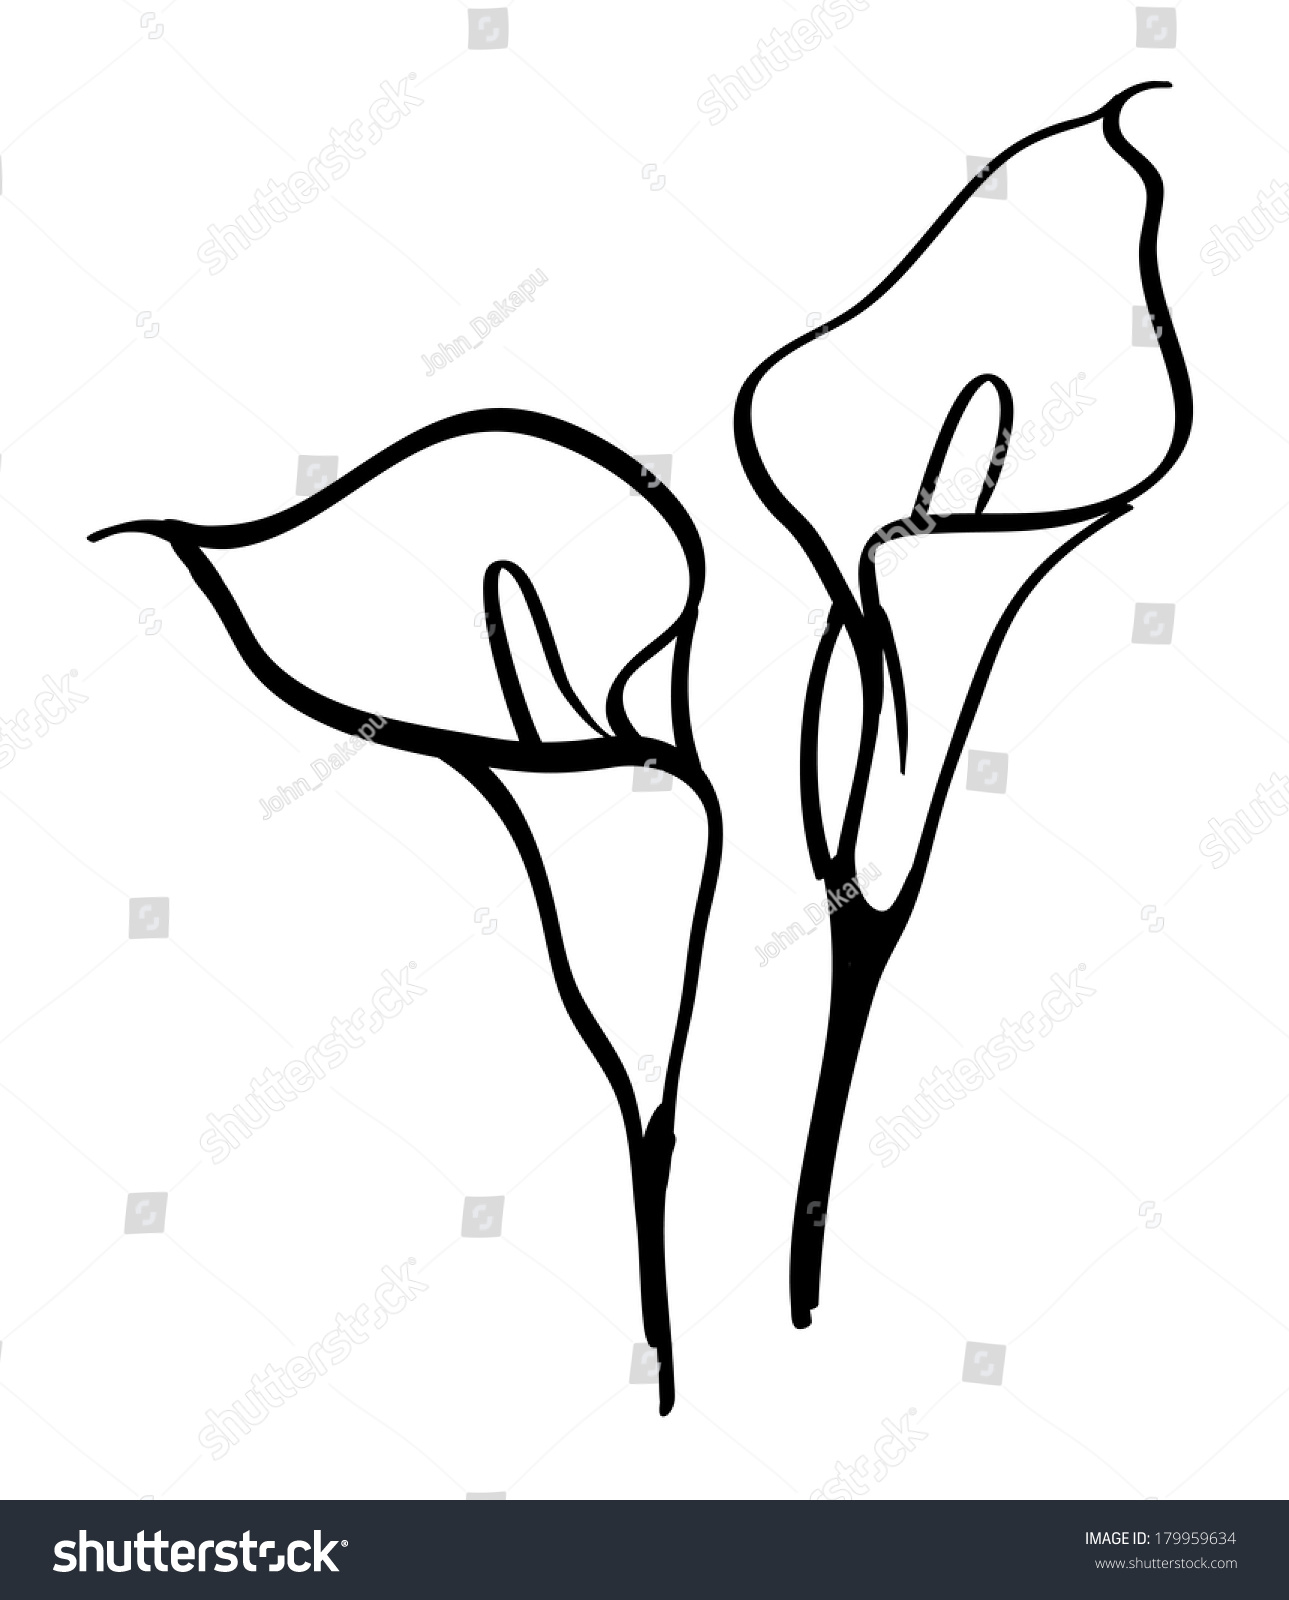 Black Silhouettes Of Calla Lilies. Vector Illustration On White ...